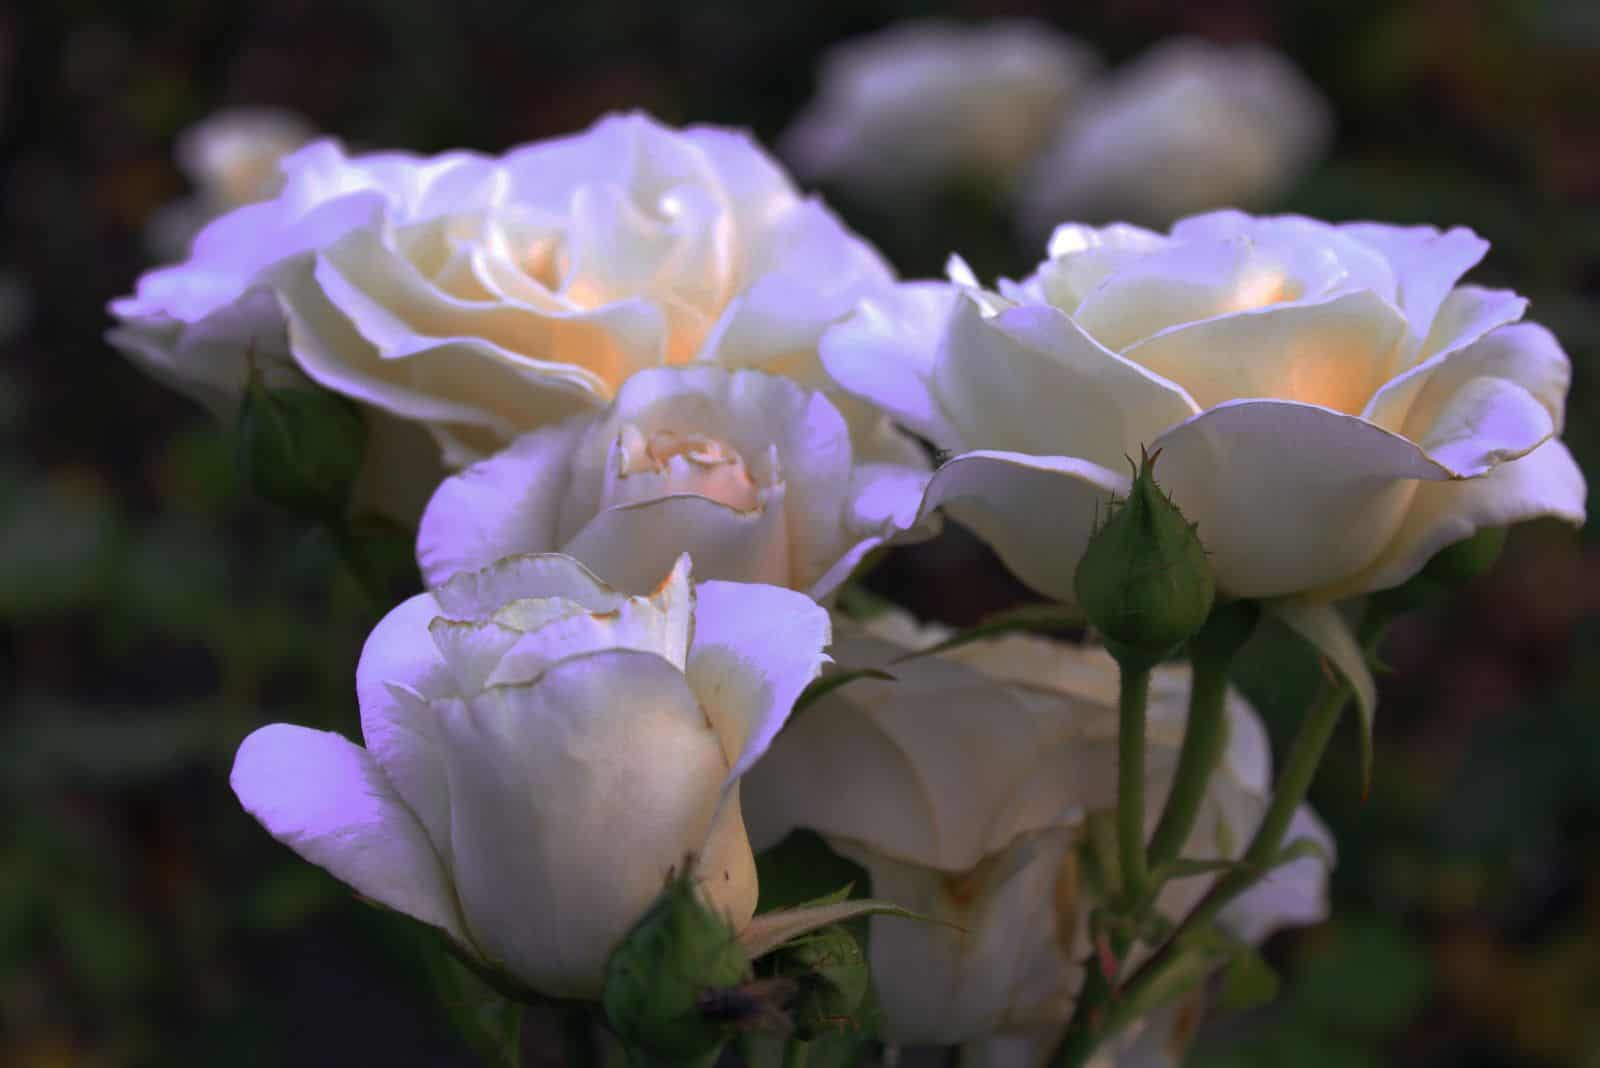 white roses in the garden at night